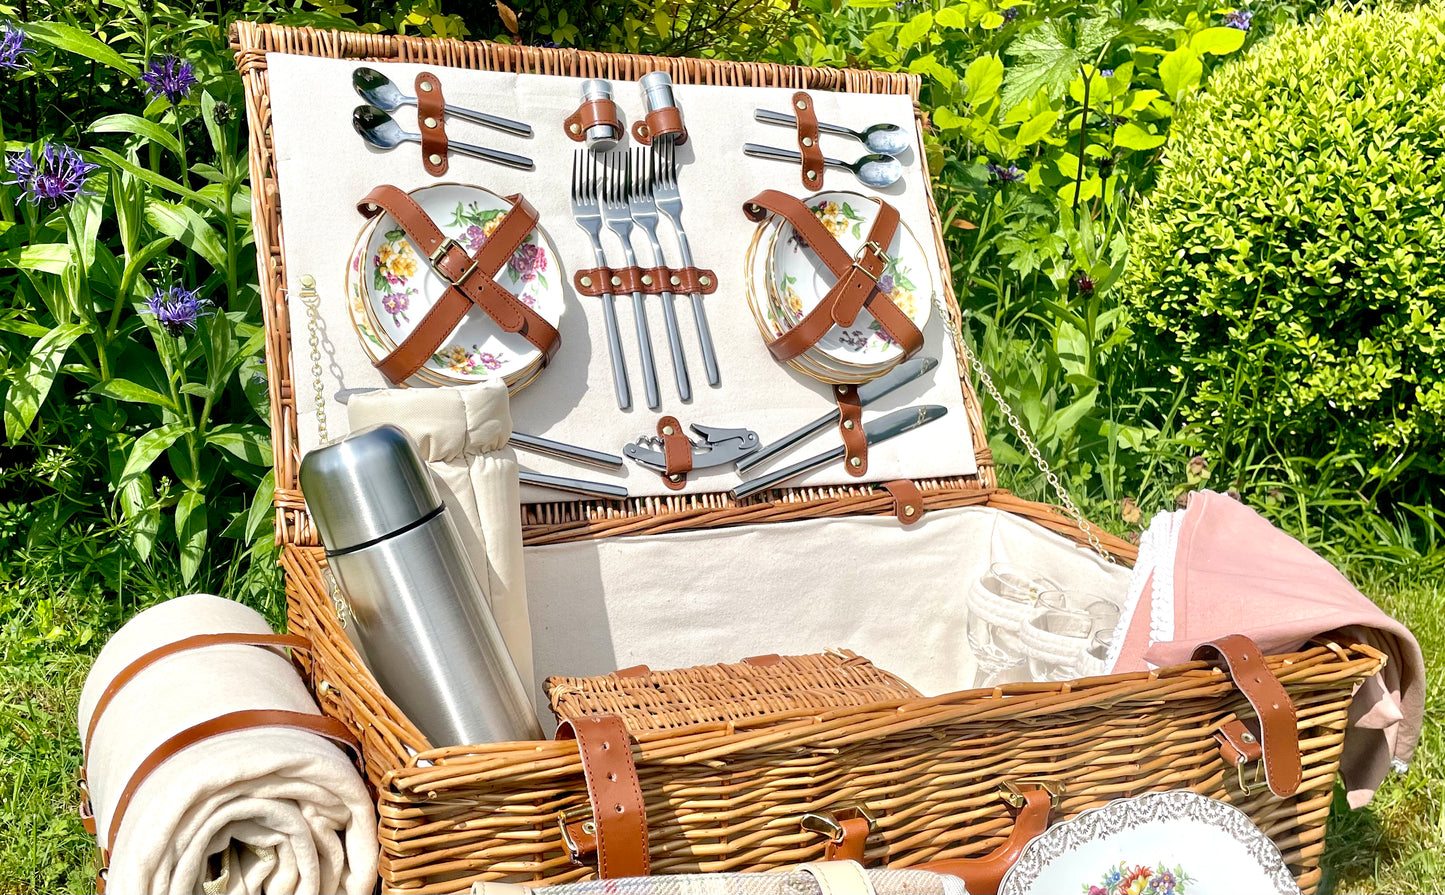 The Chelsea  leather trimmed picnic hamper for 4